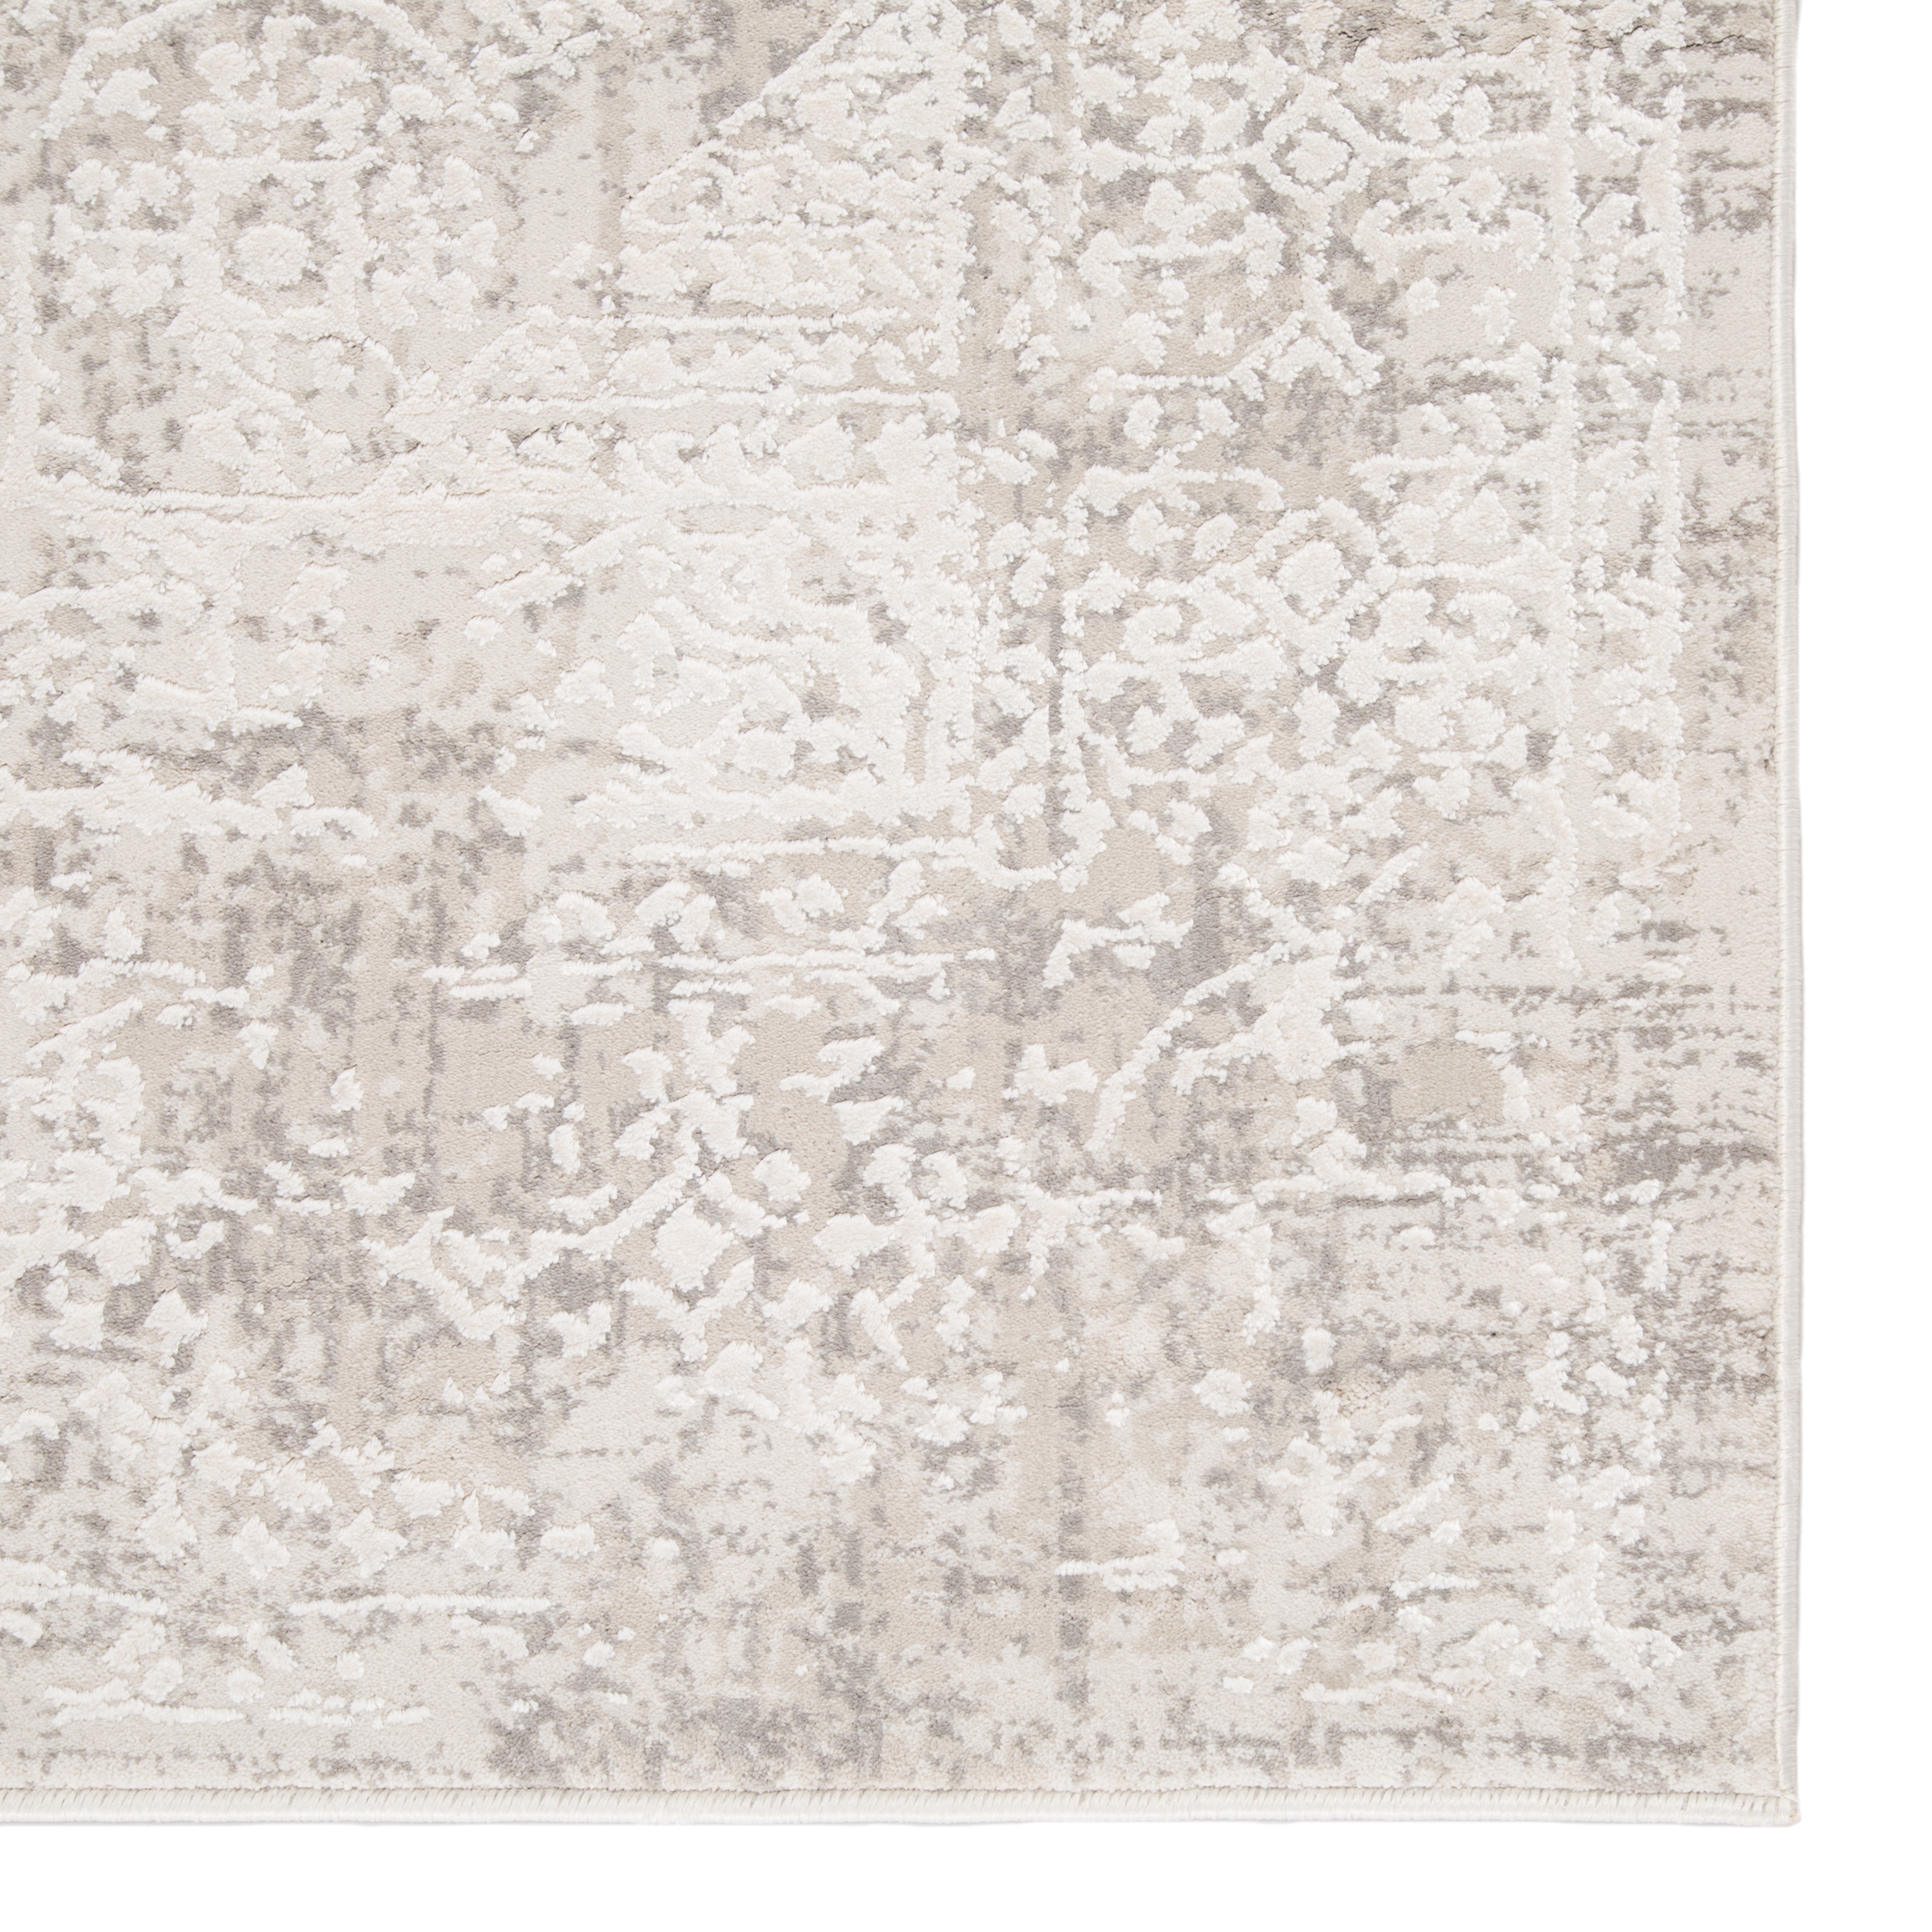 Lianna Abstract Silver/ White Area Rug (4'X6') - Image 3